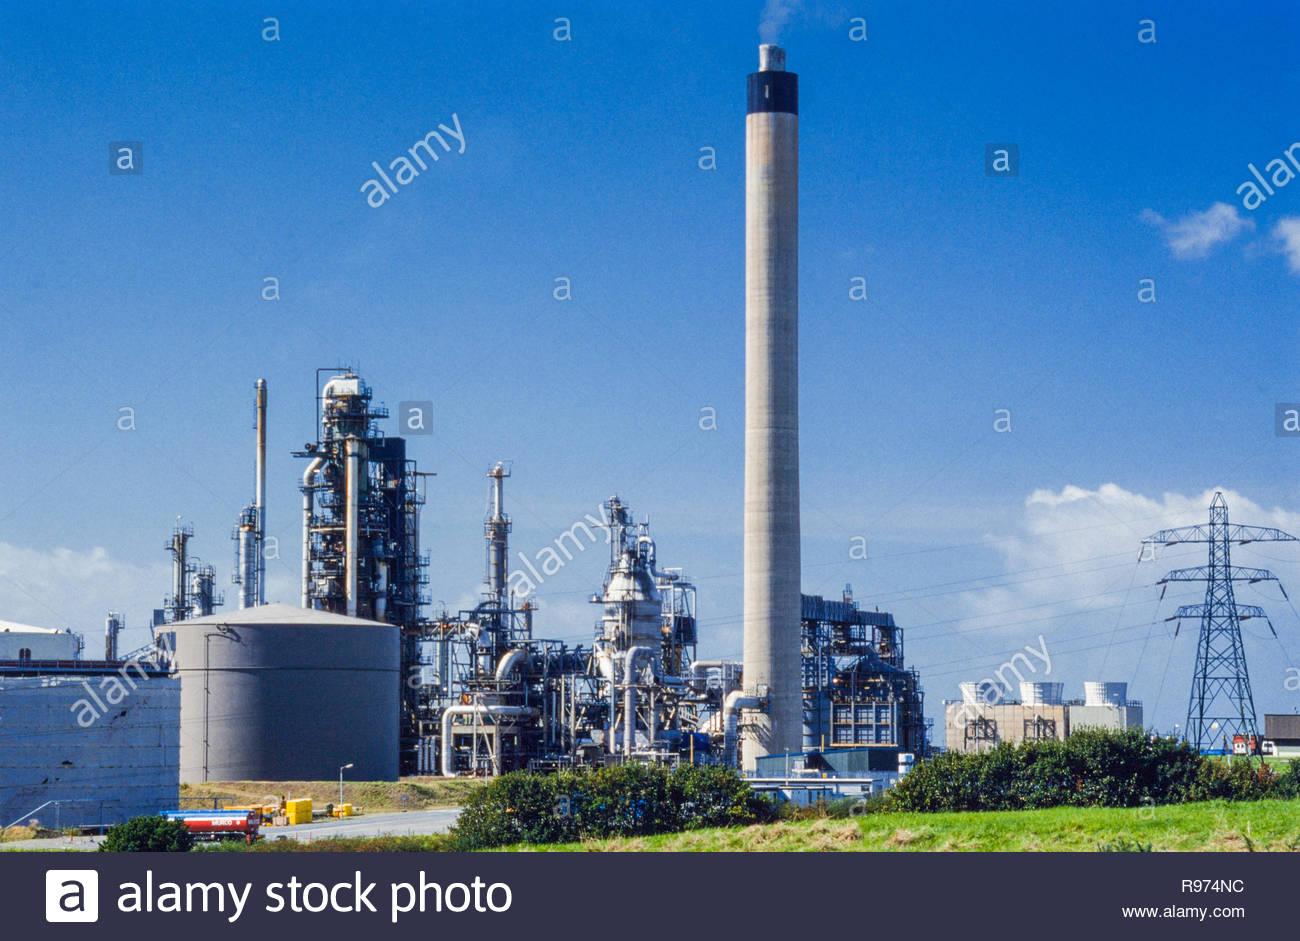 Milford Haven oil Refinery, a 